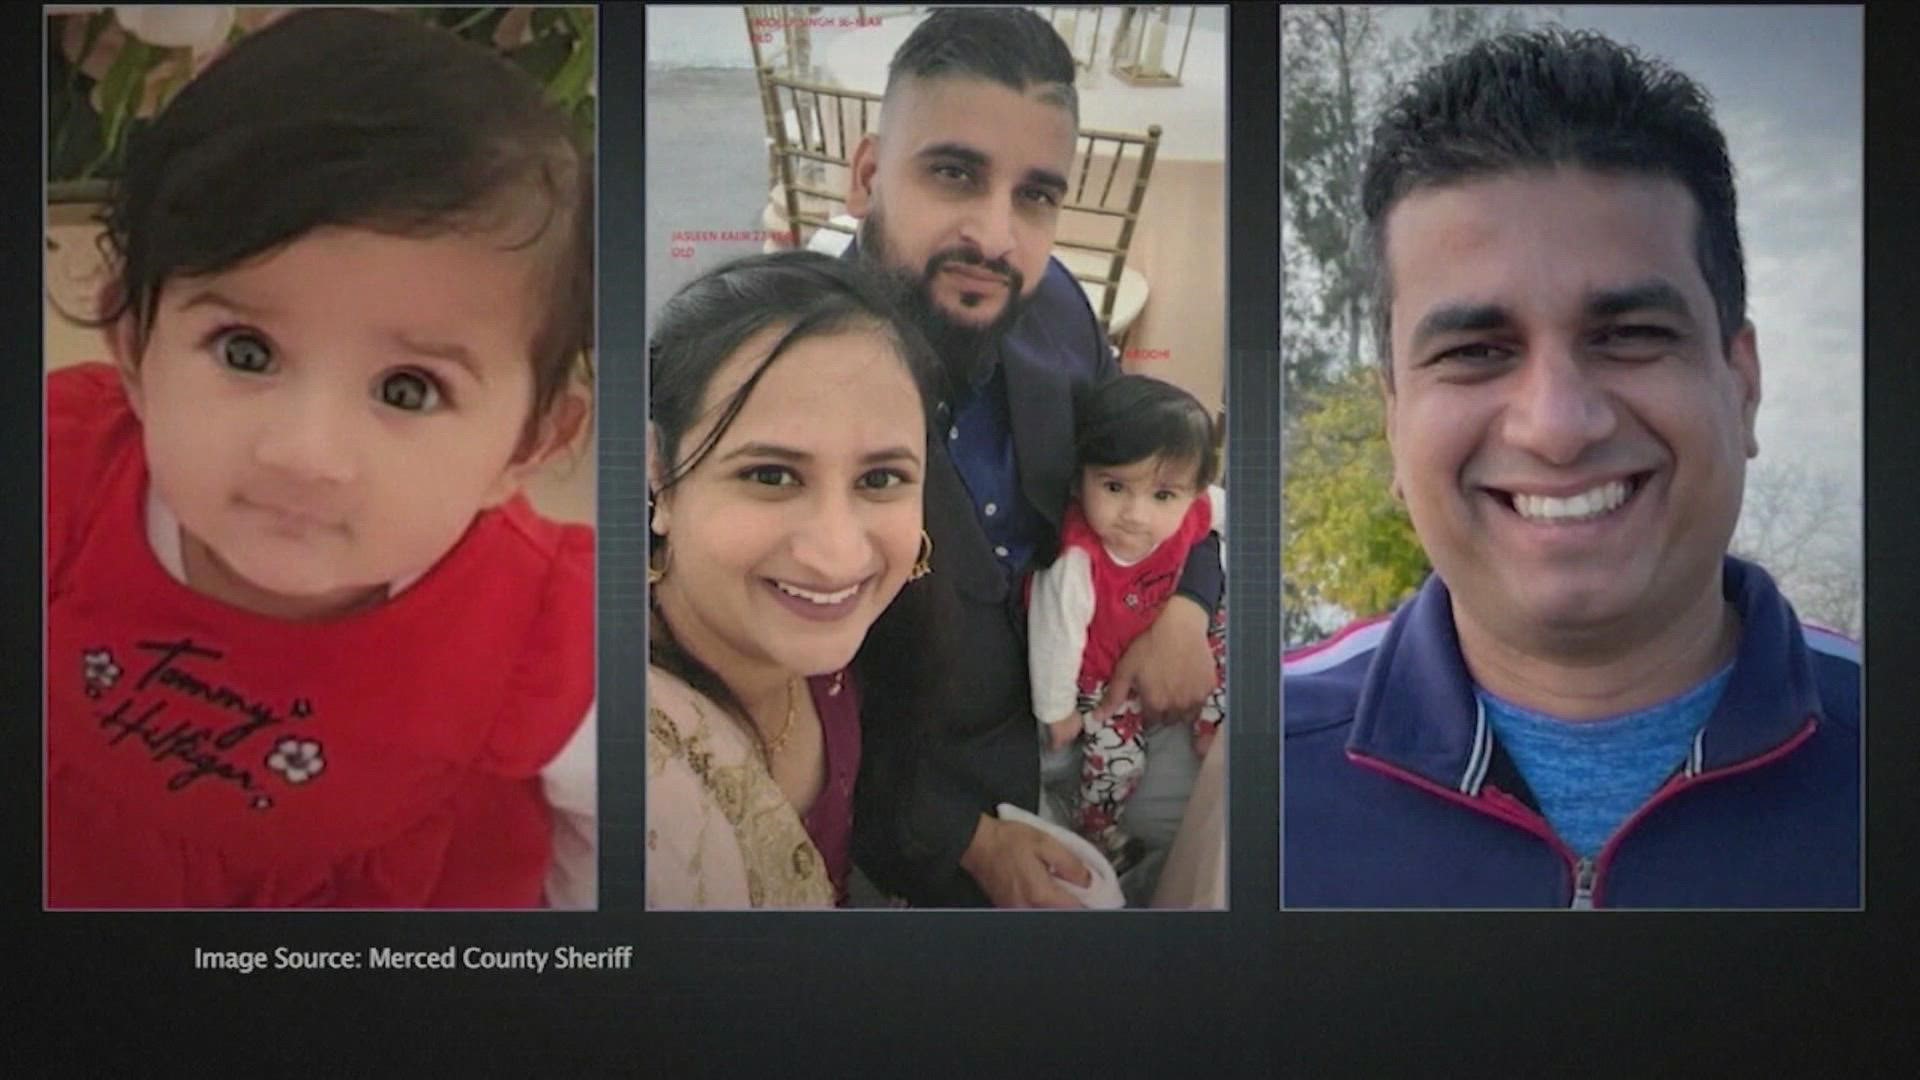 The family kidnapped from their business has been found dead, the Merced County Sheriff's Office announced.